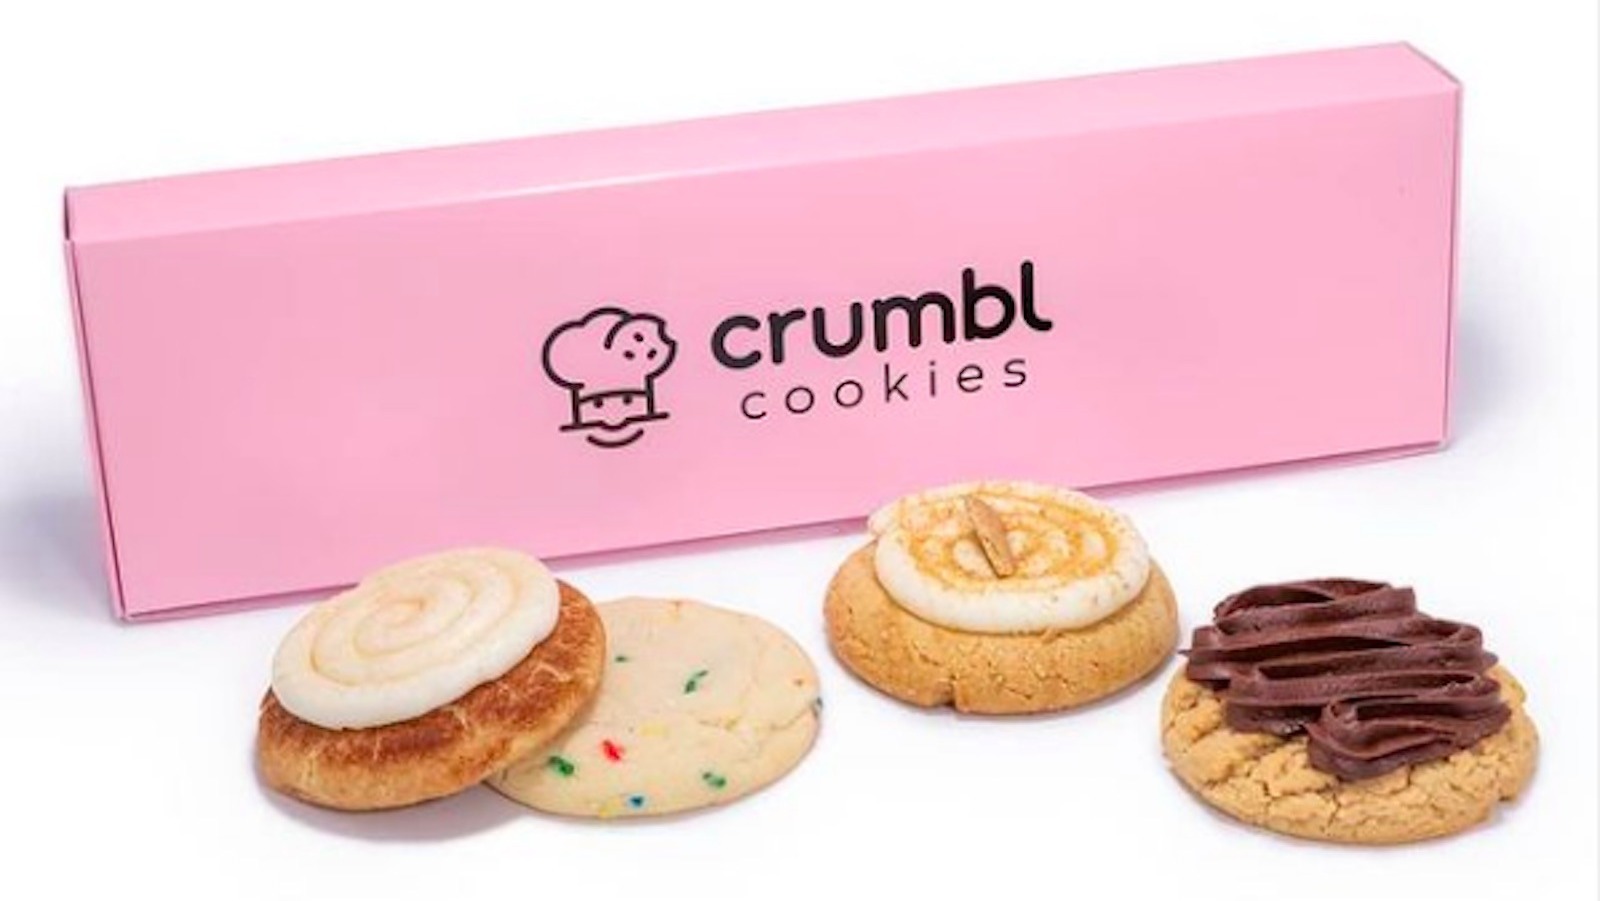 crumbl-cookies-founders-dish-on-the-chain-s-viral-success-exclusive